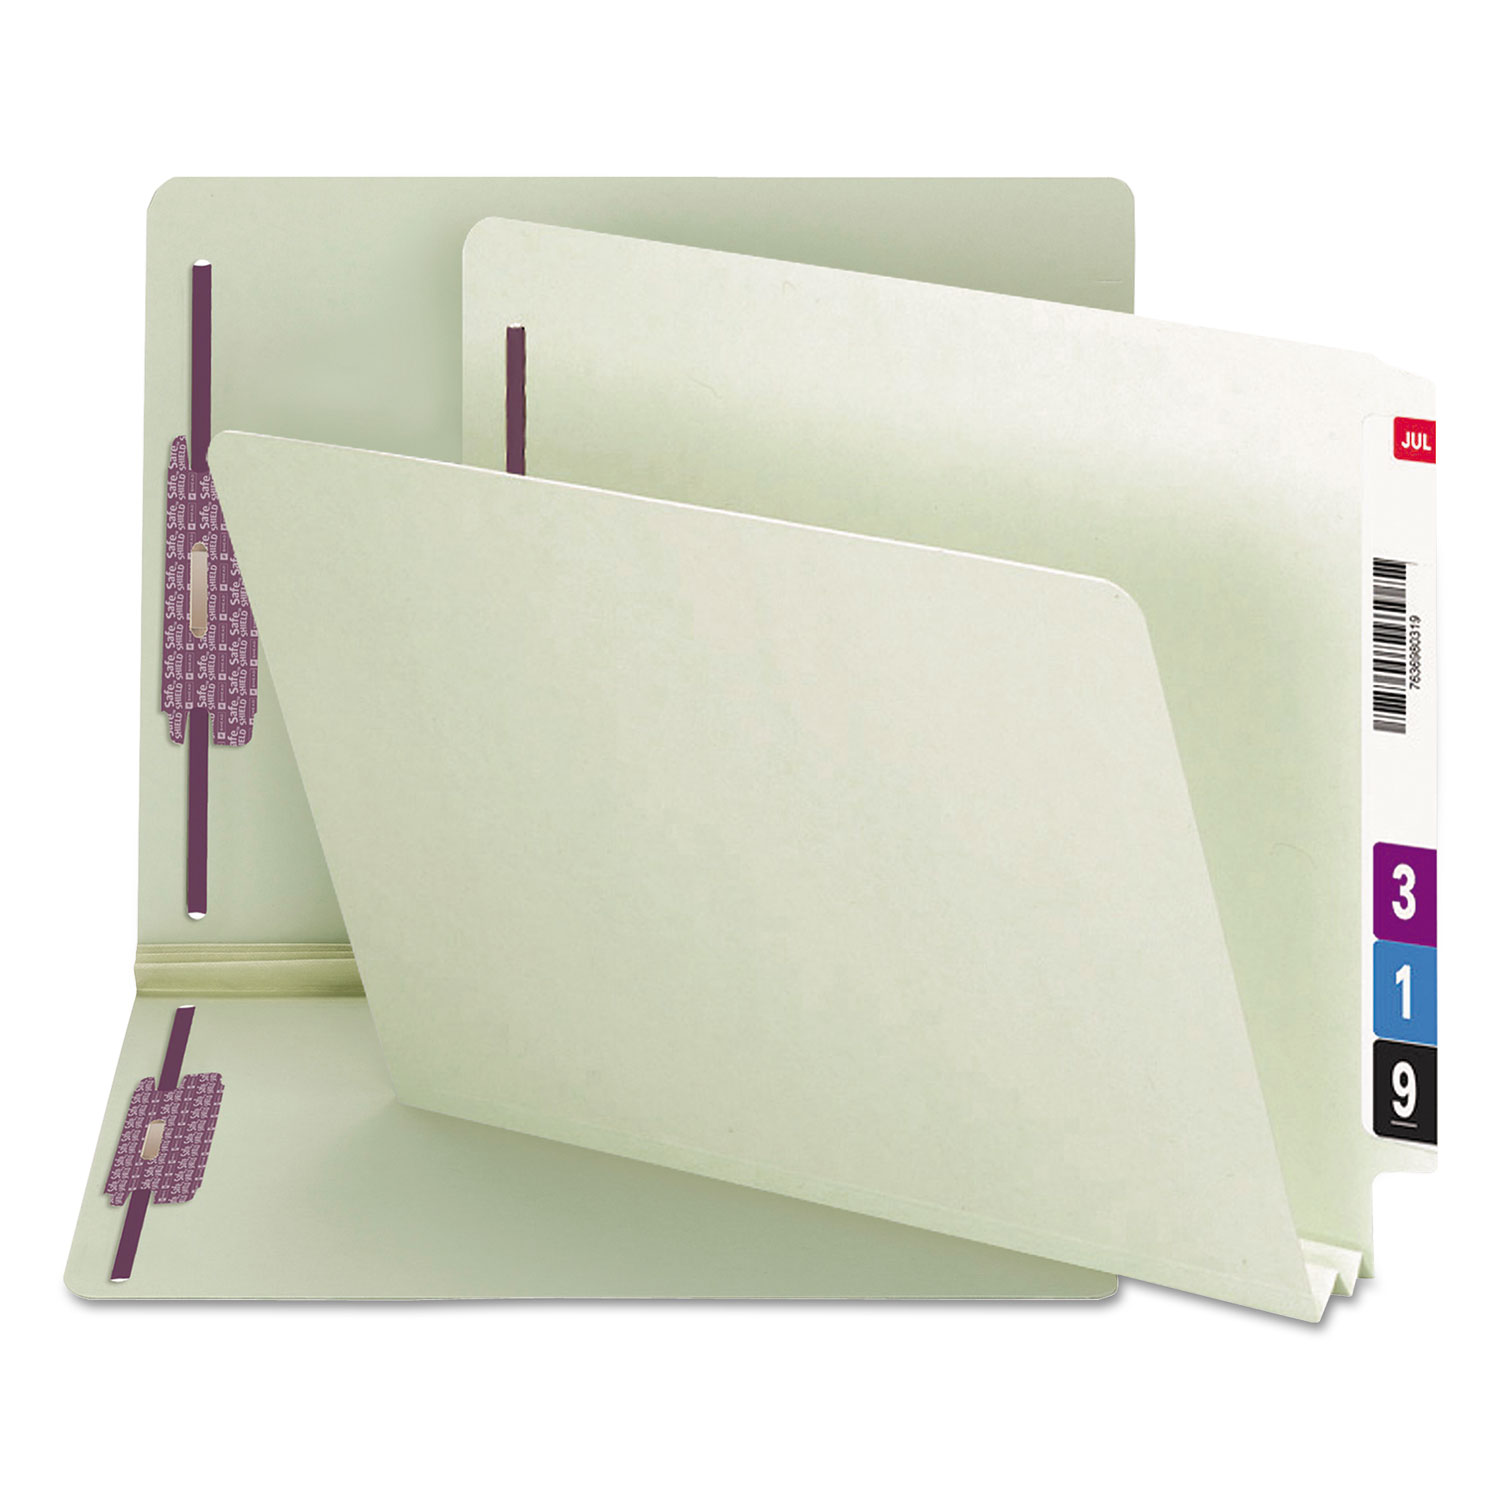 End Tab 2" Expansion Pressboard File Folders w/Two SafeSHIELD Coated Fasteners, Straight Tab, Letter Size, Gray-Green, 25/Box